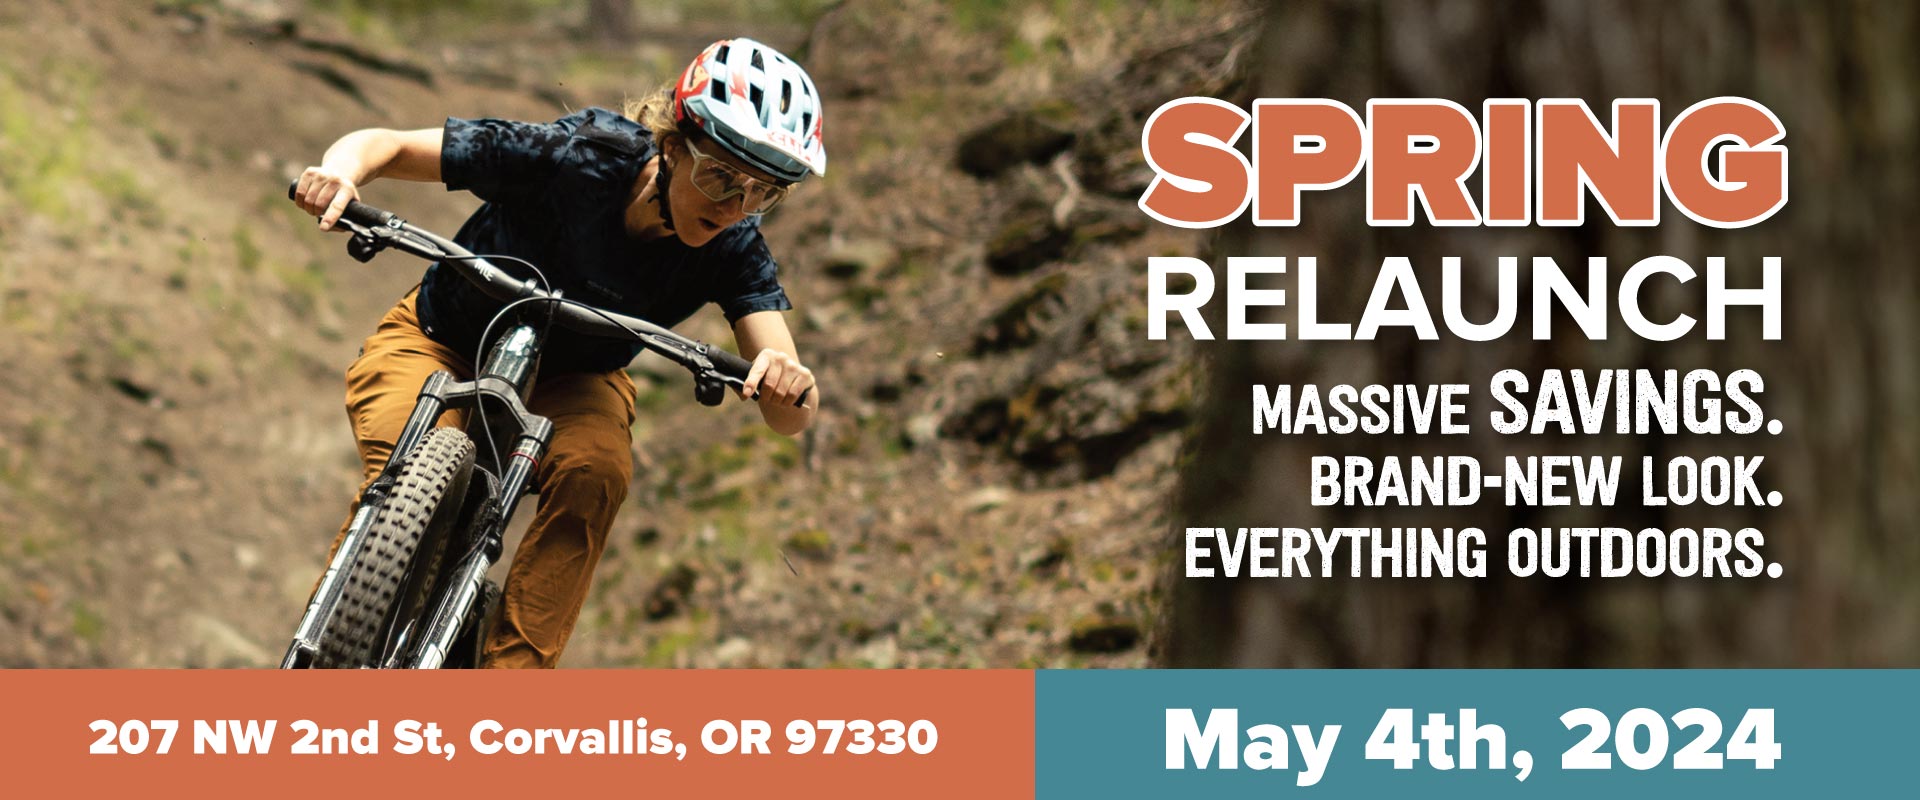 Peak Bike & Outdoor is hosting our Spring Relaunch on May 4th!